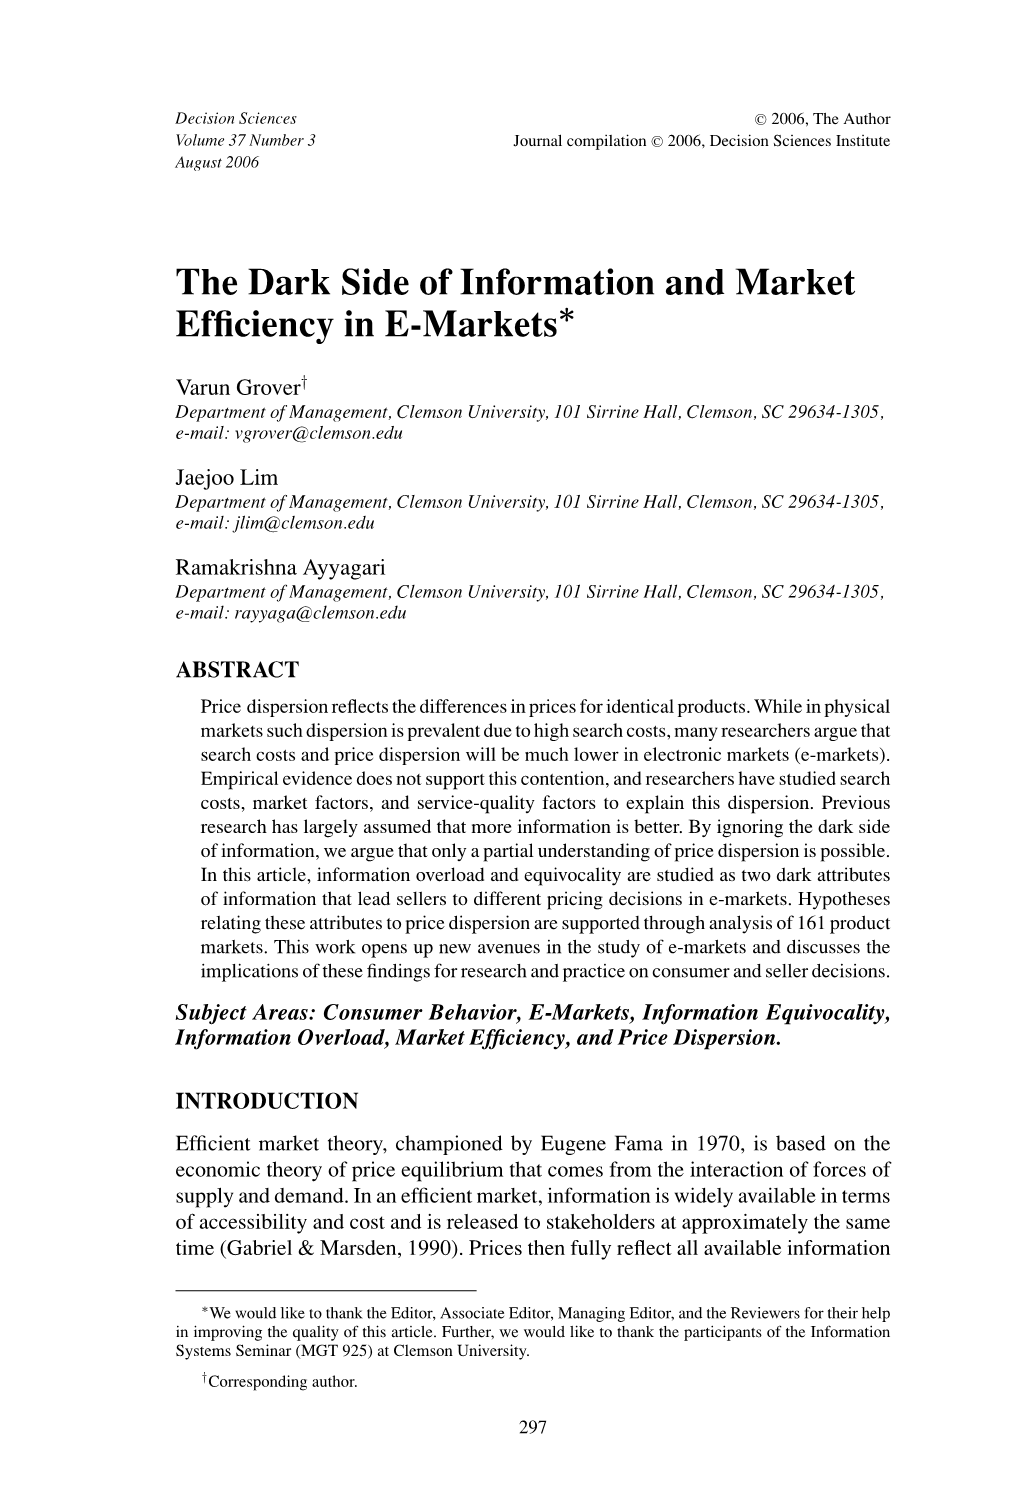 The Dark Side of Information and Market Efficiency in E-Markets